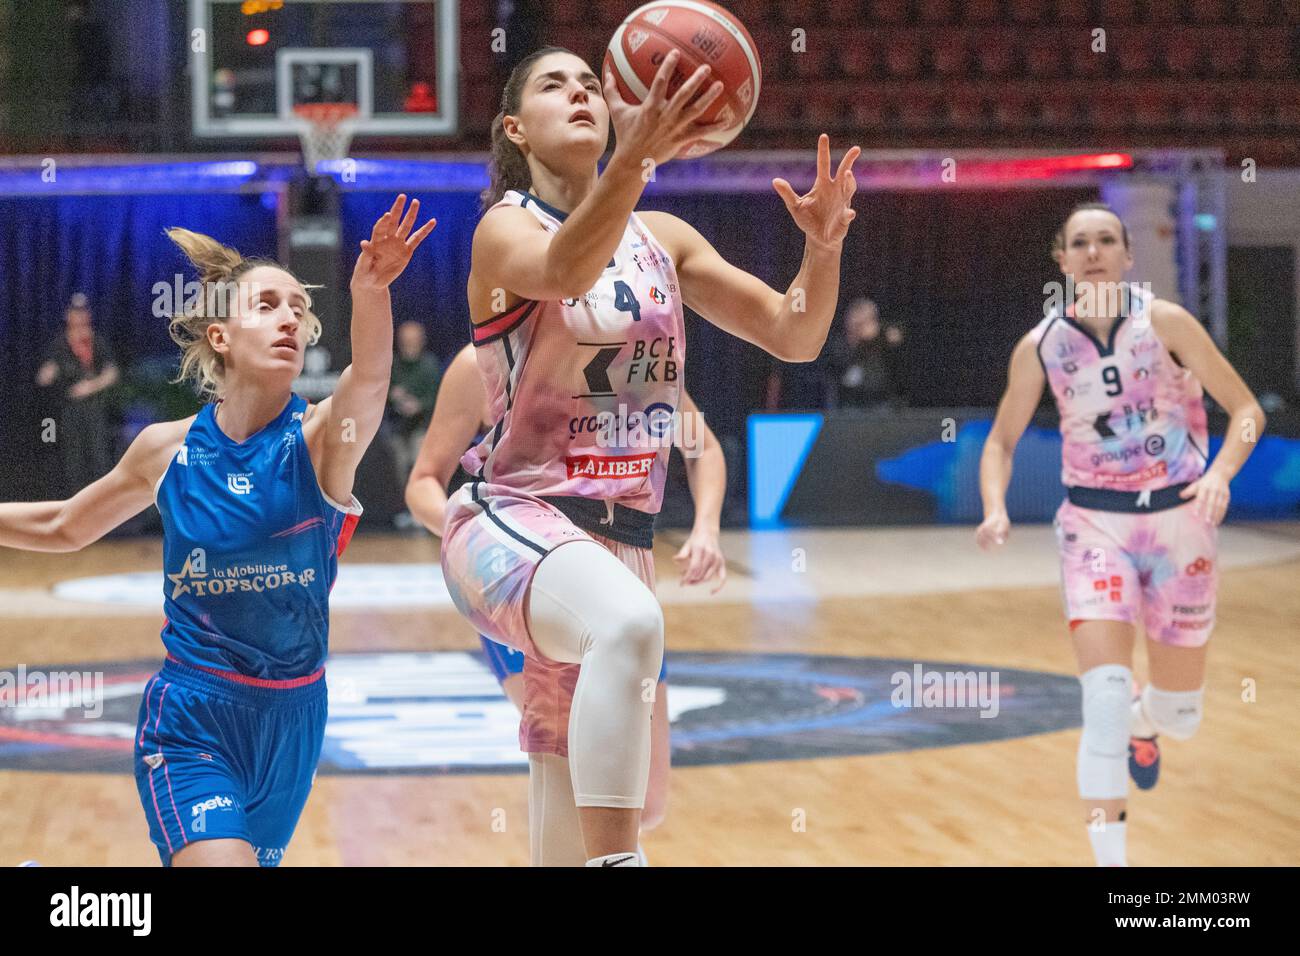 Montreux Switzerland, 01/29/2023: Flora Nancy of BCF Fribourg is in action  during Final of Swiss Basketball League 2023. The final of the Swiss  Basketball League took place at the Perrier sports hall